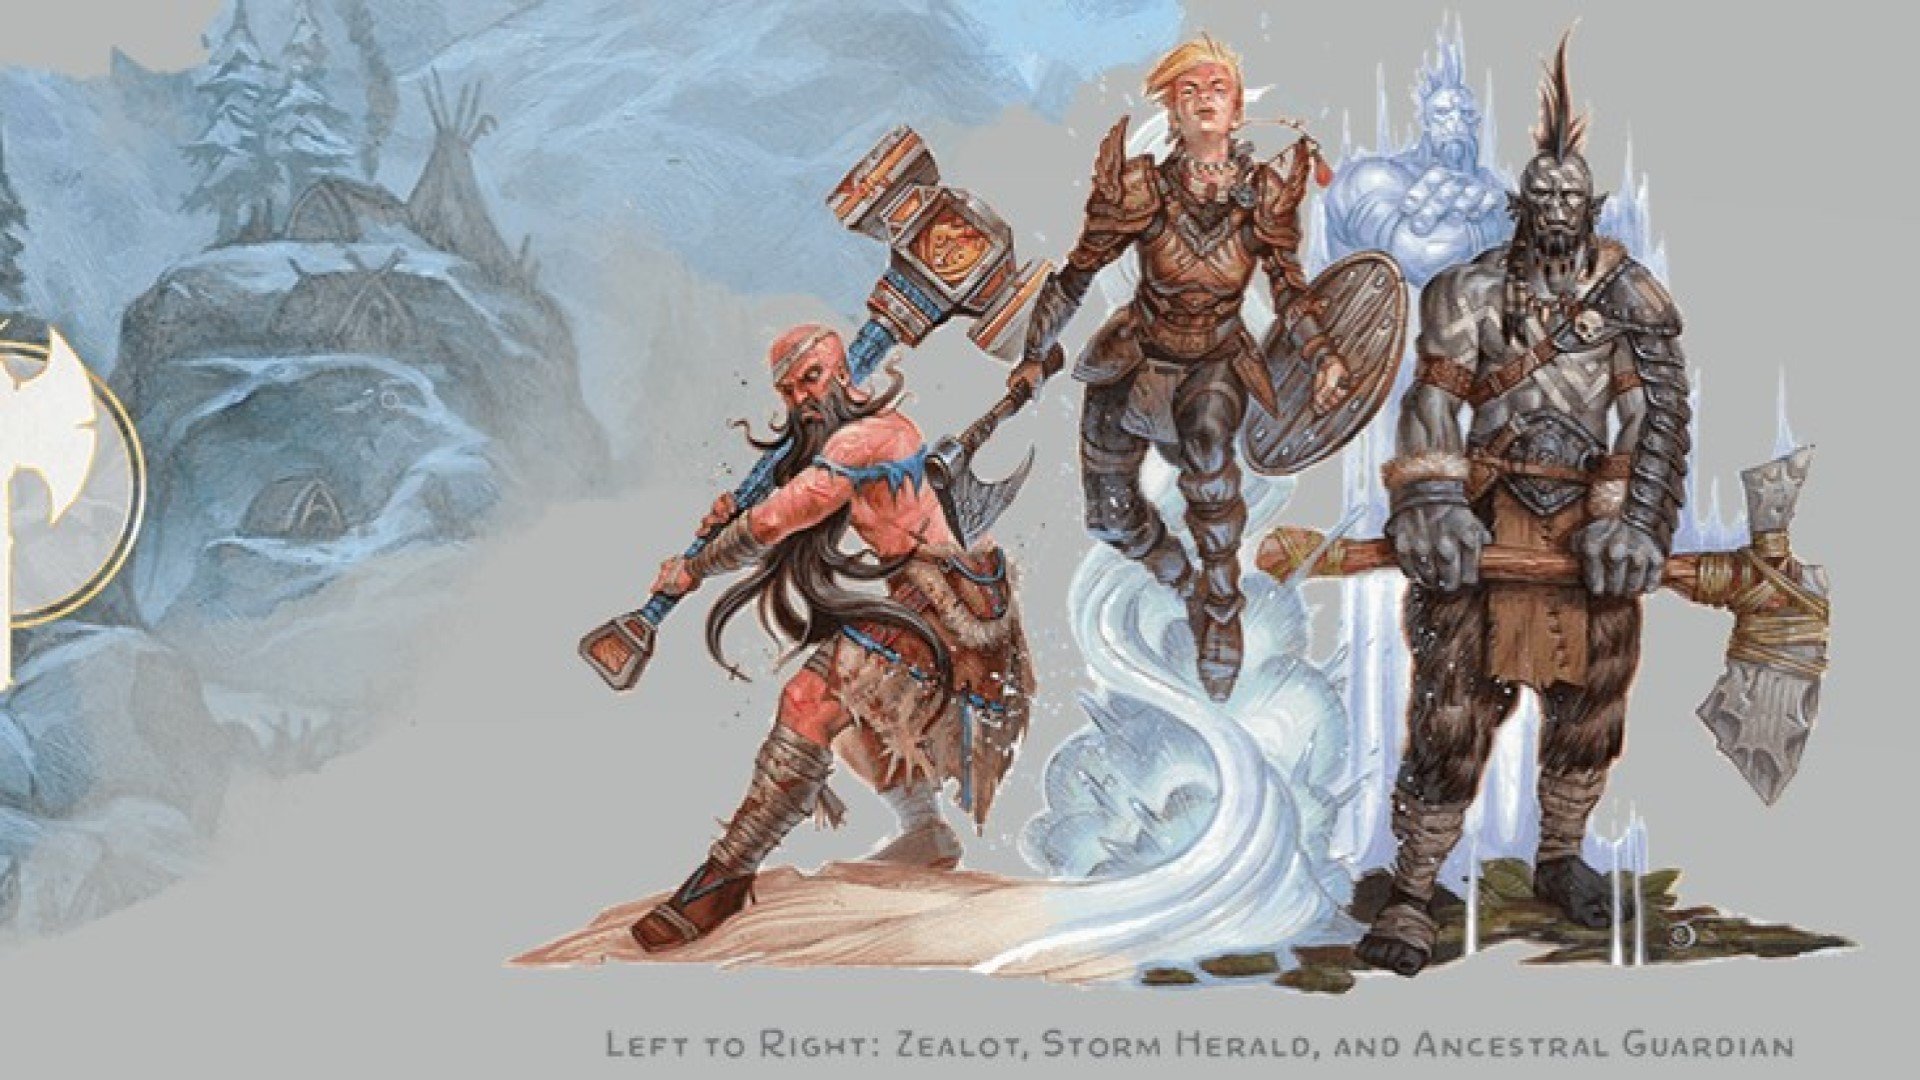 DnD Barbarian 5E class guide - Wizards of the Coast artwork showing barbarians from three primal paths